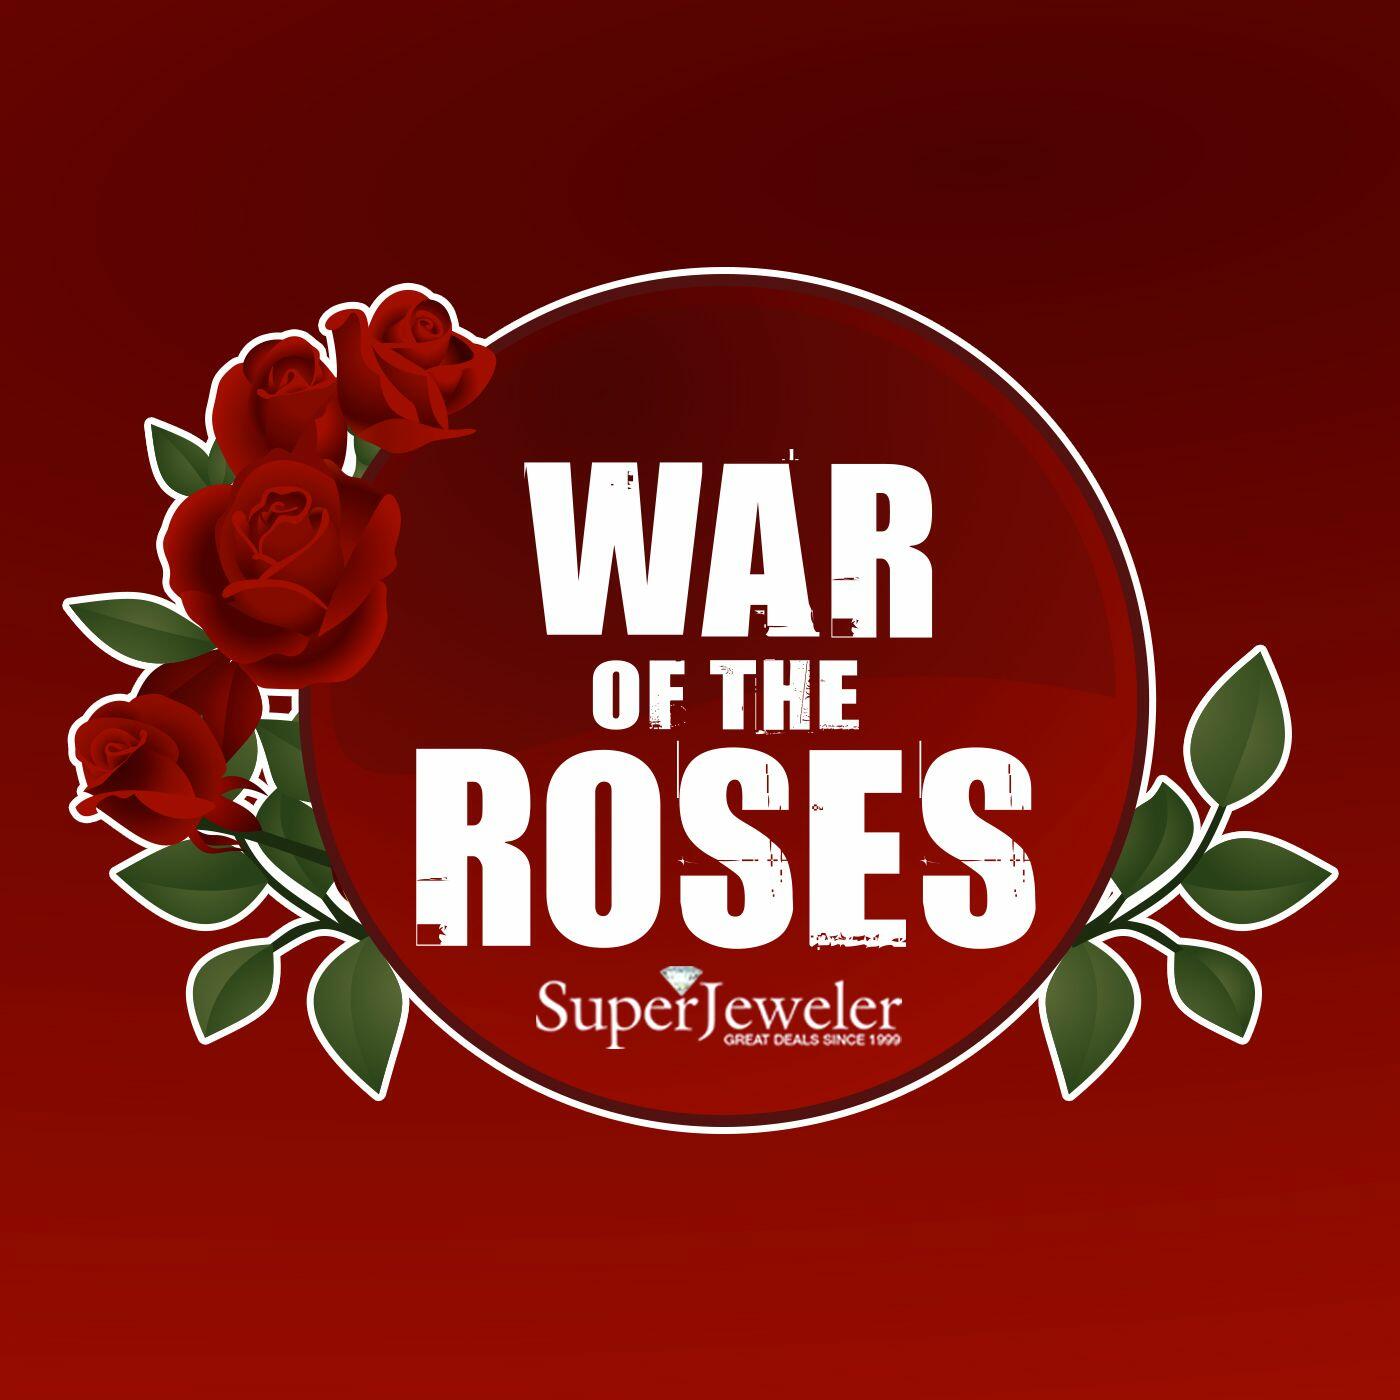 Listen Free to 103.5 KTU War of the Roses on iHeartRadio Podcasts